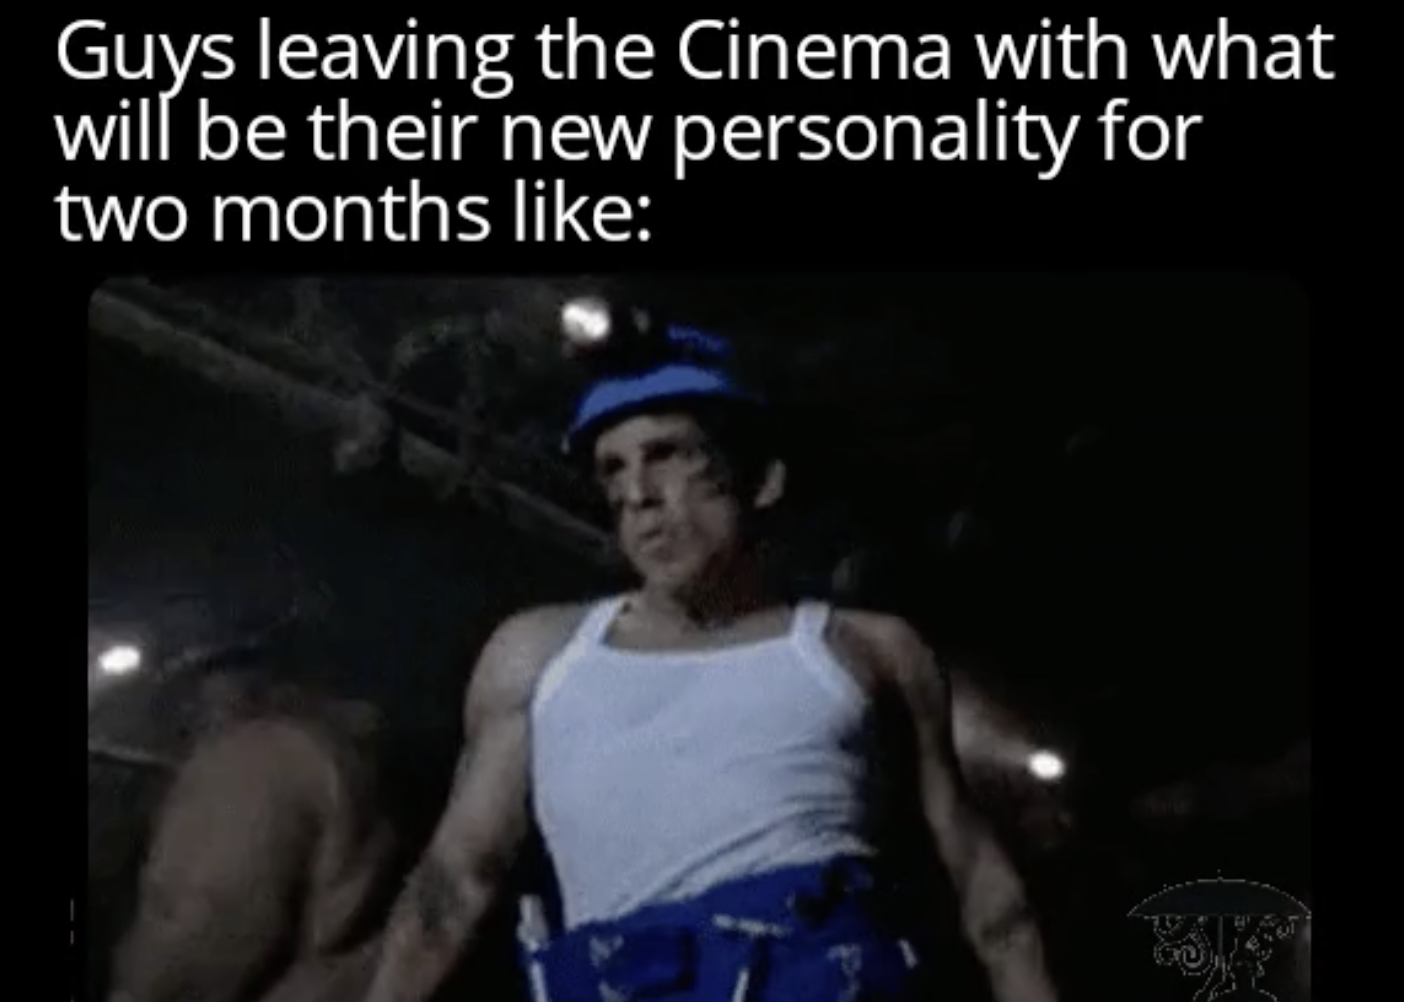 zoolander mine - Guys leaving the Cinema with what will be their new personality for two months